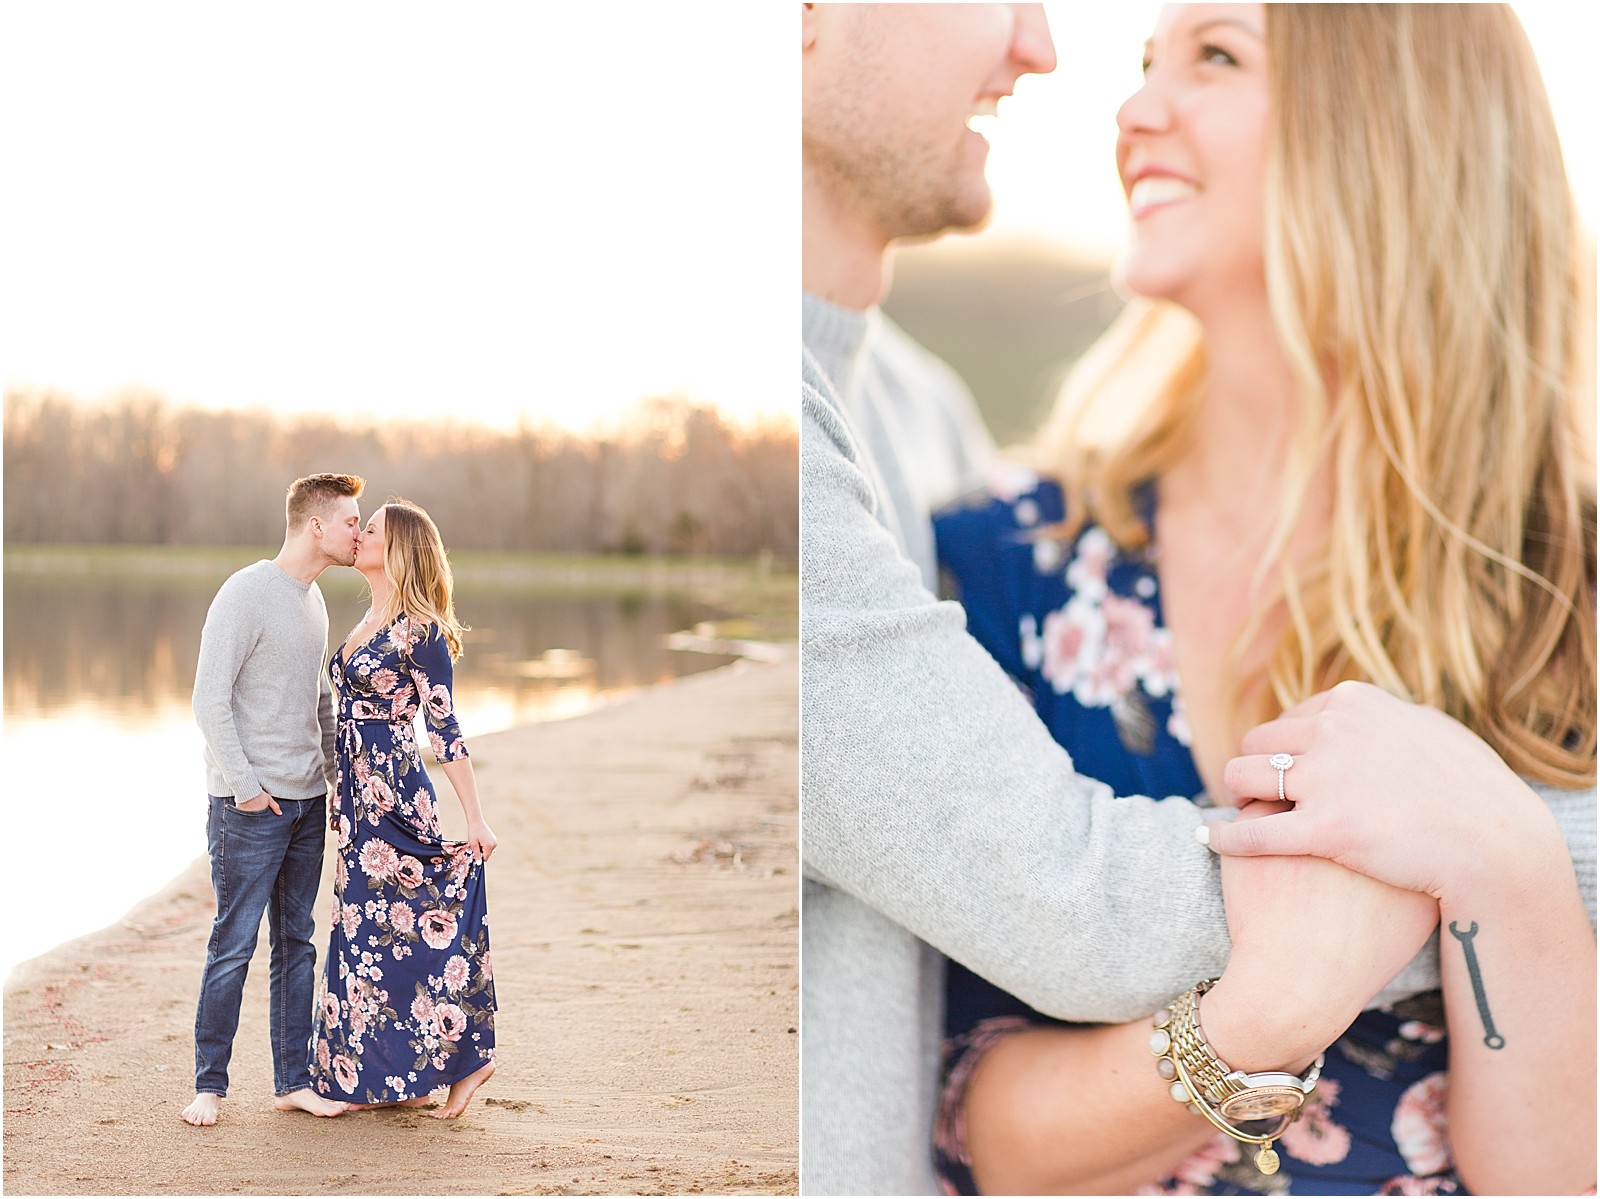 Rachel and Nick | Lincoln State Park Engagement Session 027.jpg